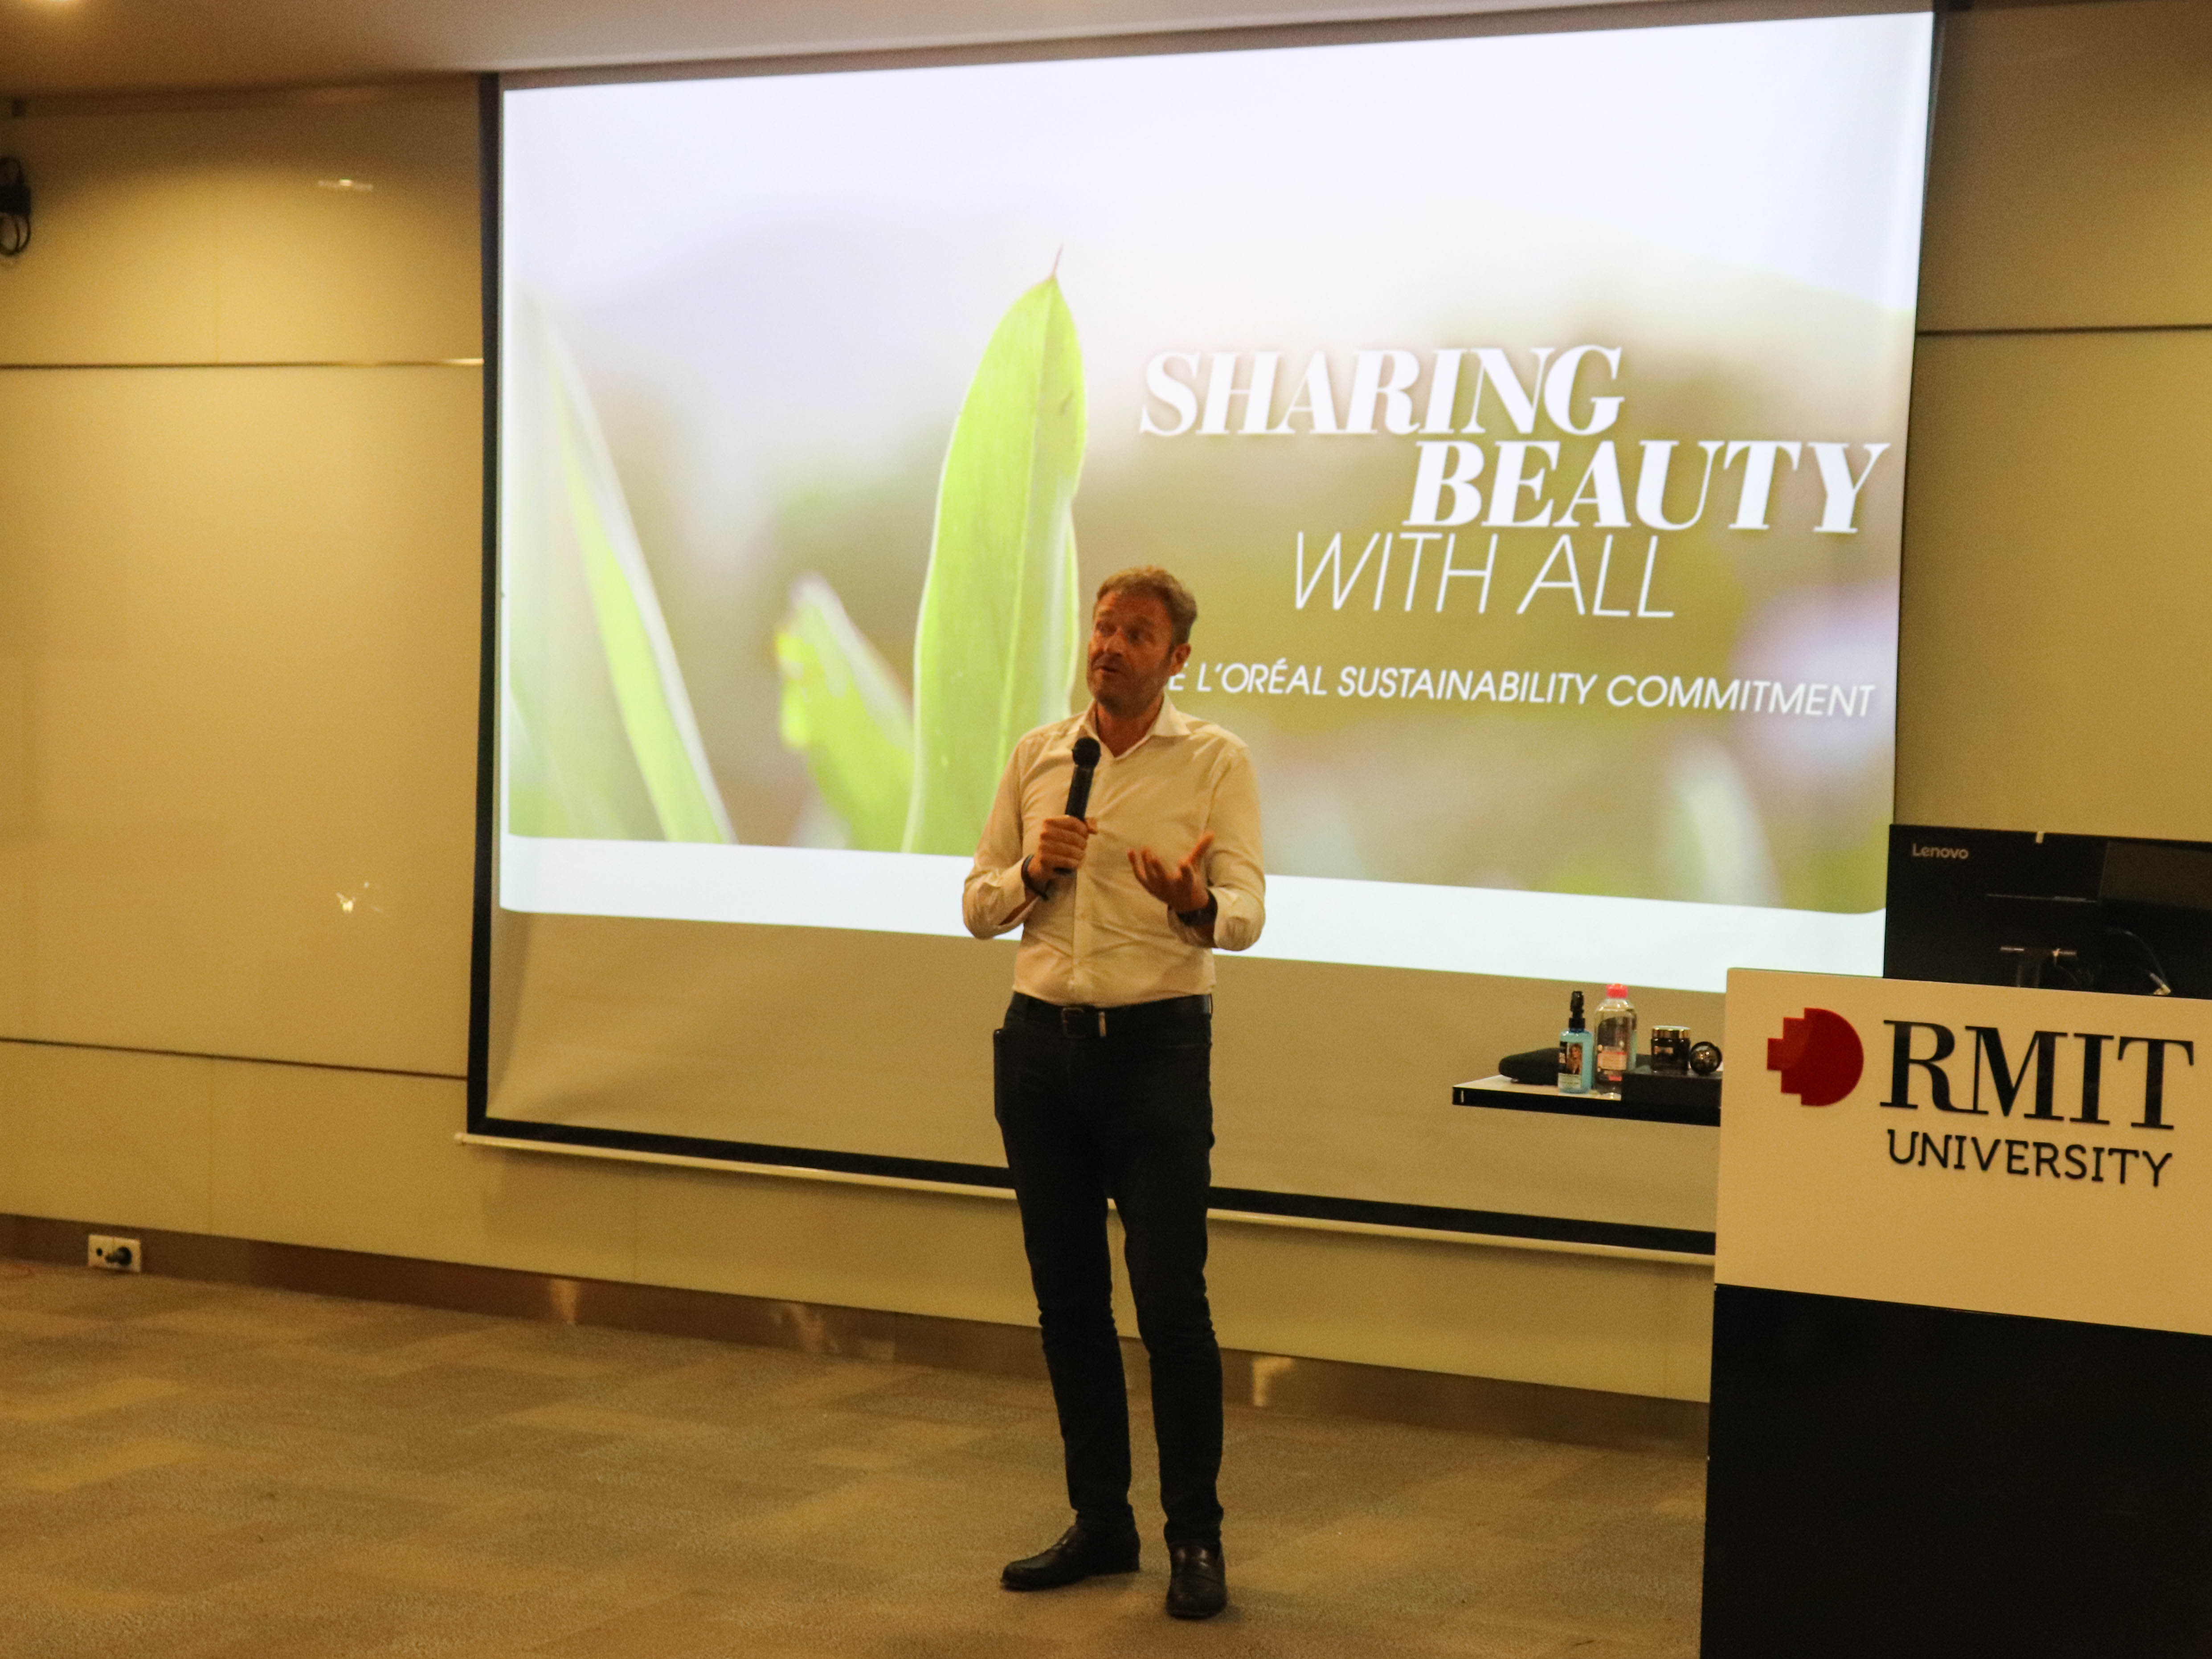 At a recent talk at RMIT Vietnam, L'Oreal Vietnam General Director Valery Gaucherand addressed the importance of sustainability in business today, including issues around corporate governance and business ethics, safety and environmental health management, and responsible supply chain management.